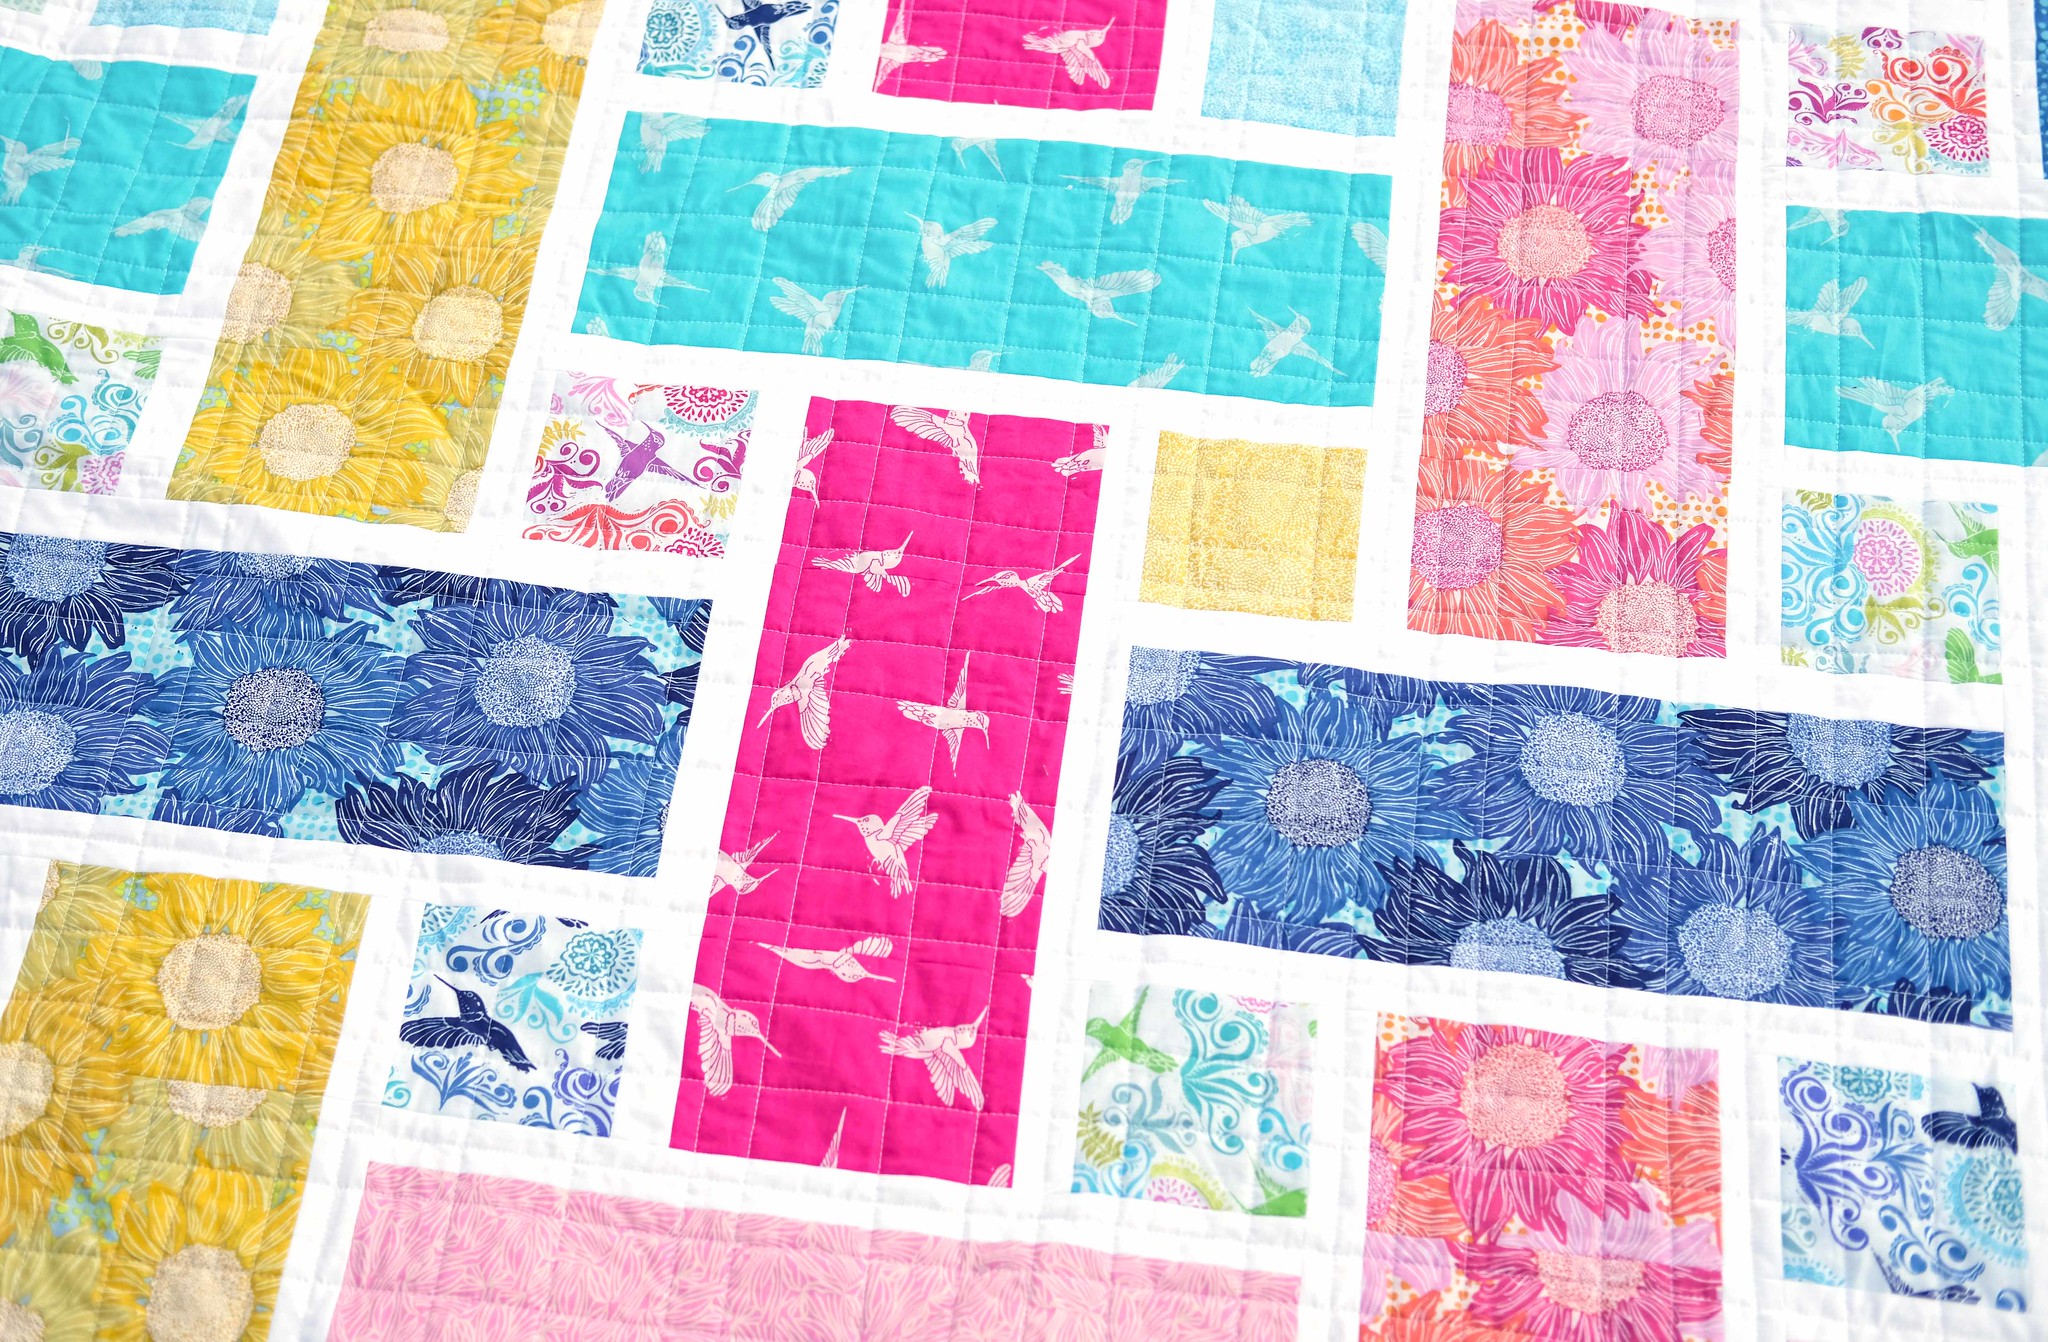 Murmur Quilt - The Tessa Quilt Pattern by Kitchen Table Quilting